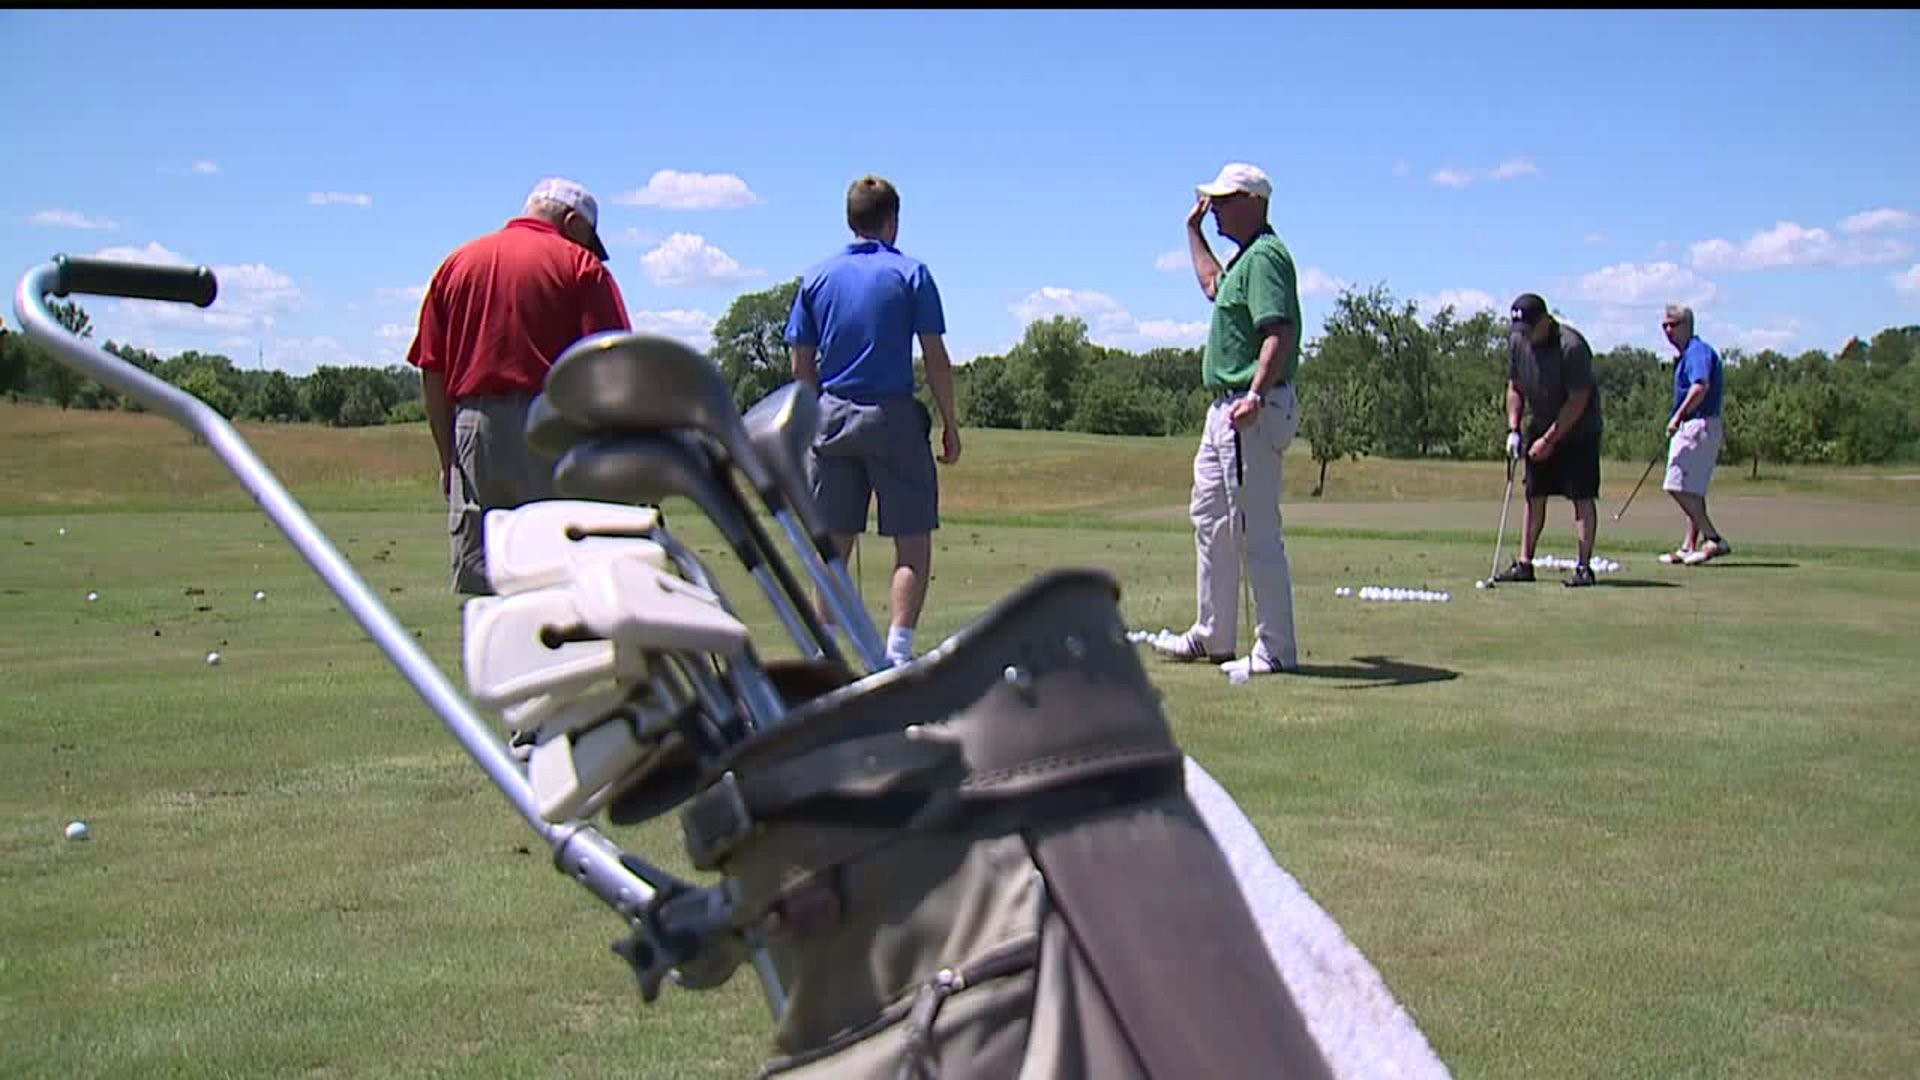 Vets finding therapeutic side to golf